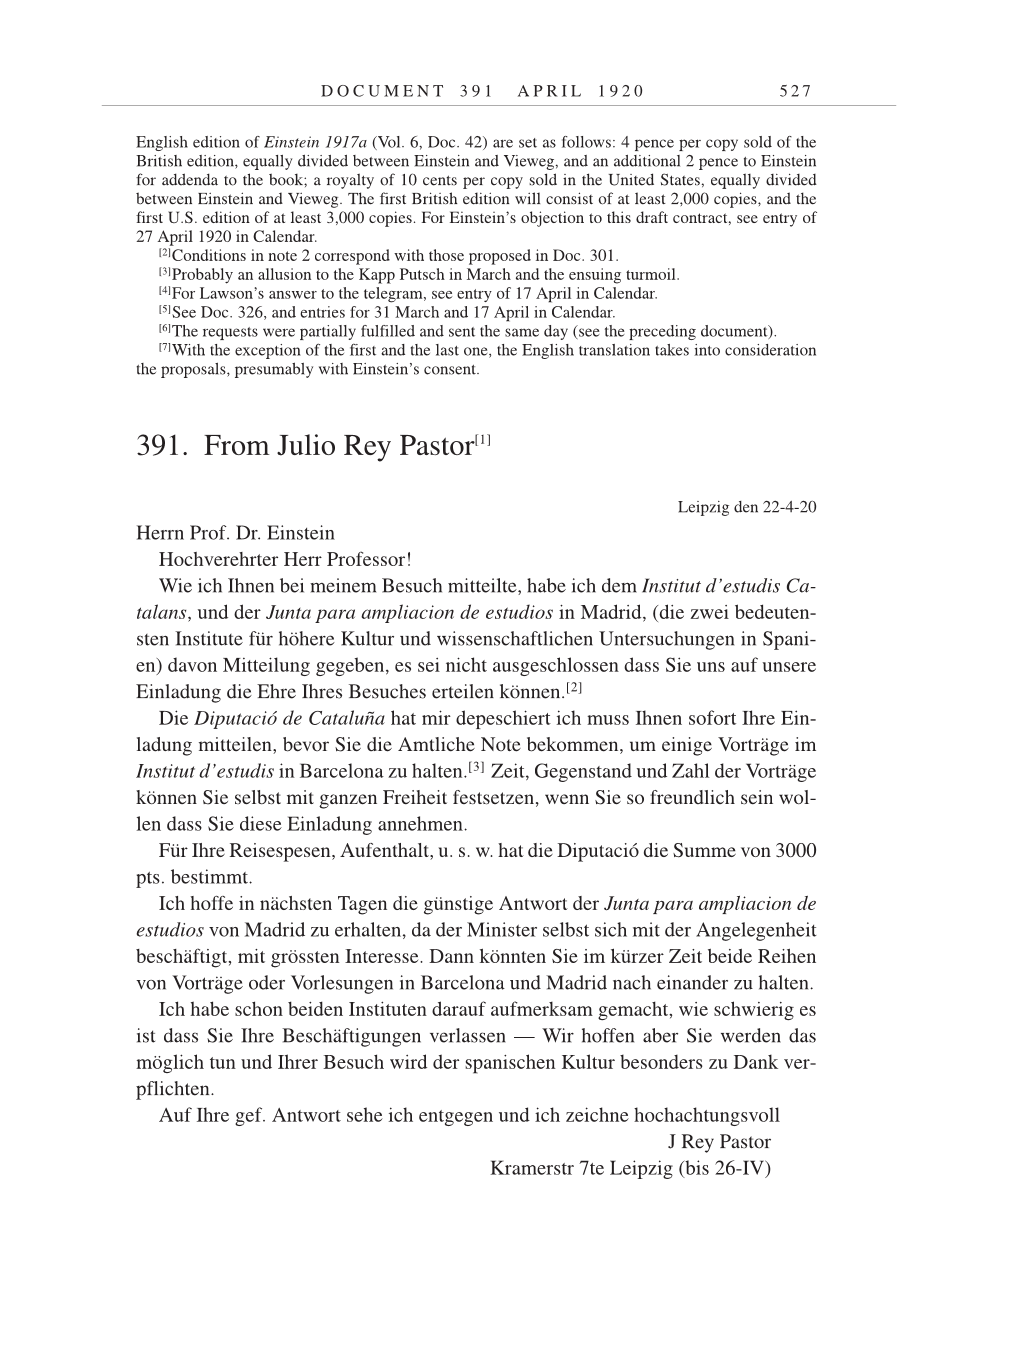 Volume 9: The Berlin Years: Correspondence January 1919-April 1920 page 527